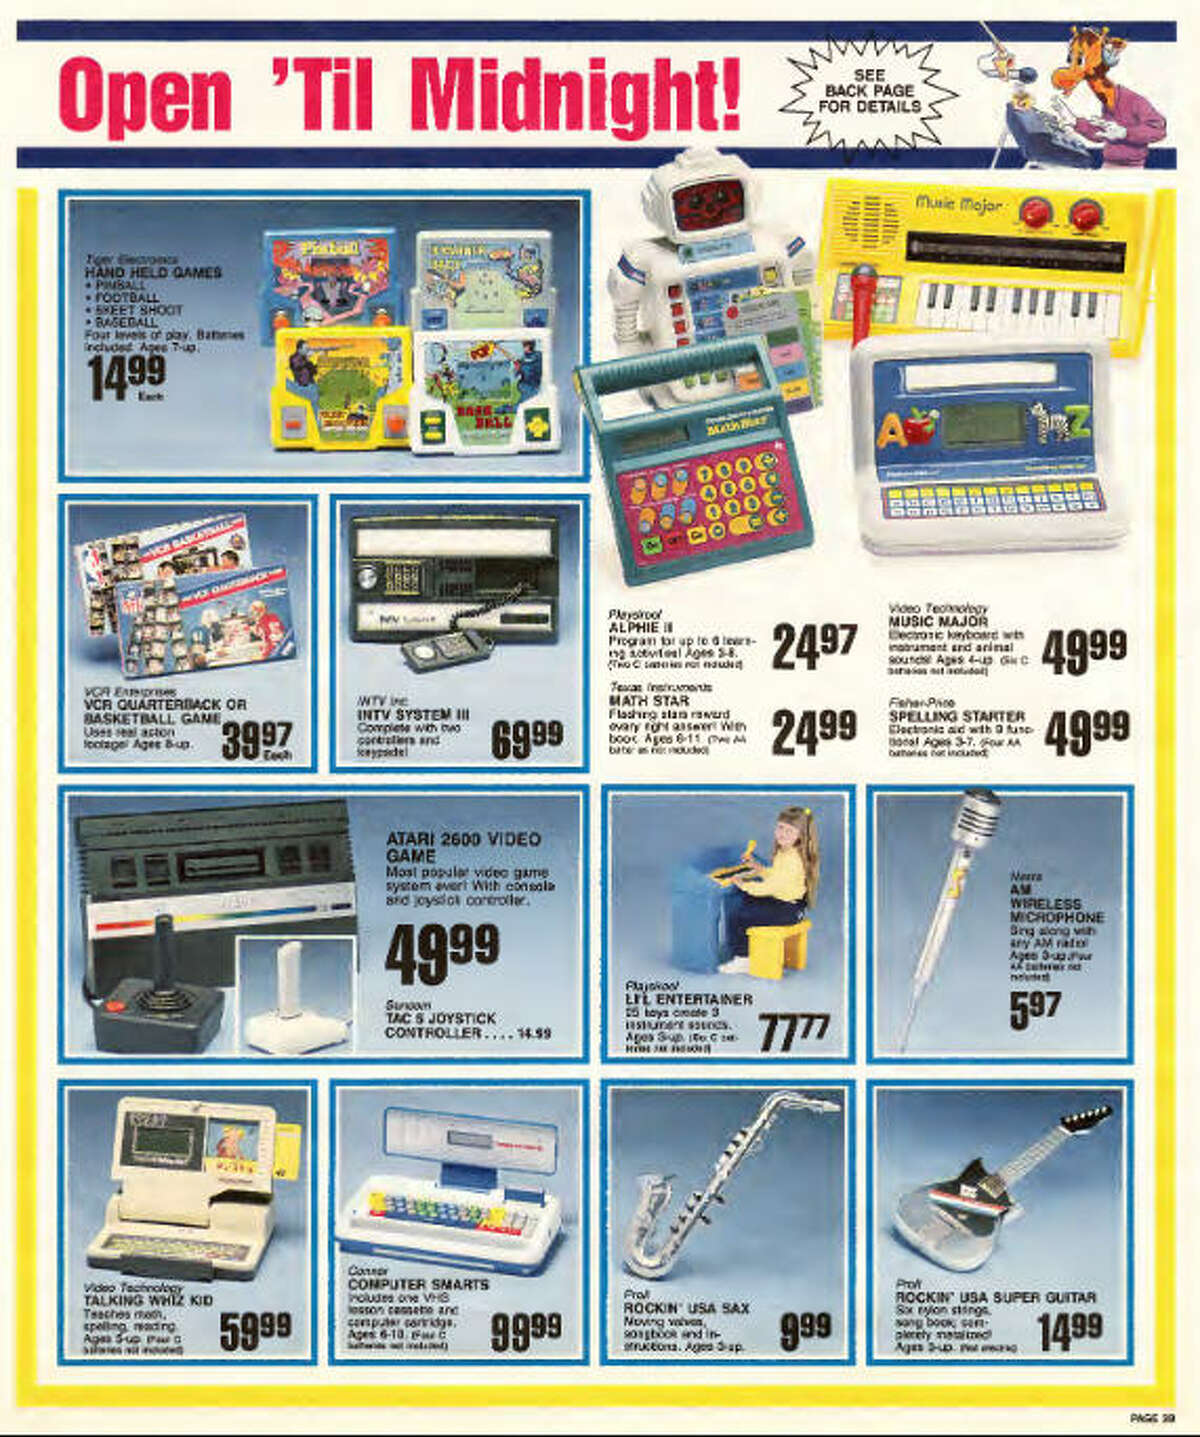 Toys R Us Catalog Shows The Hottest Toys Of 1987